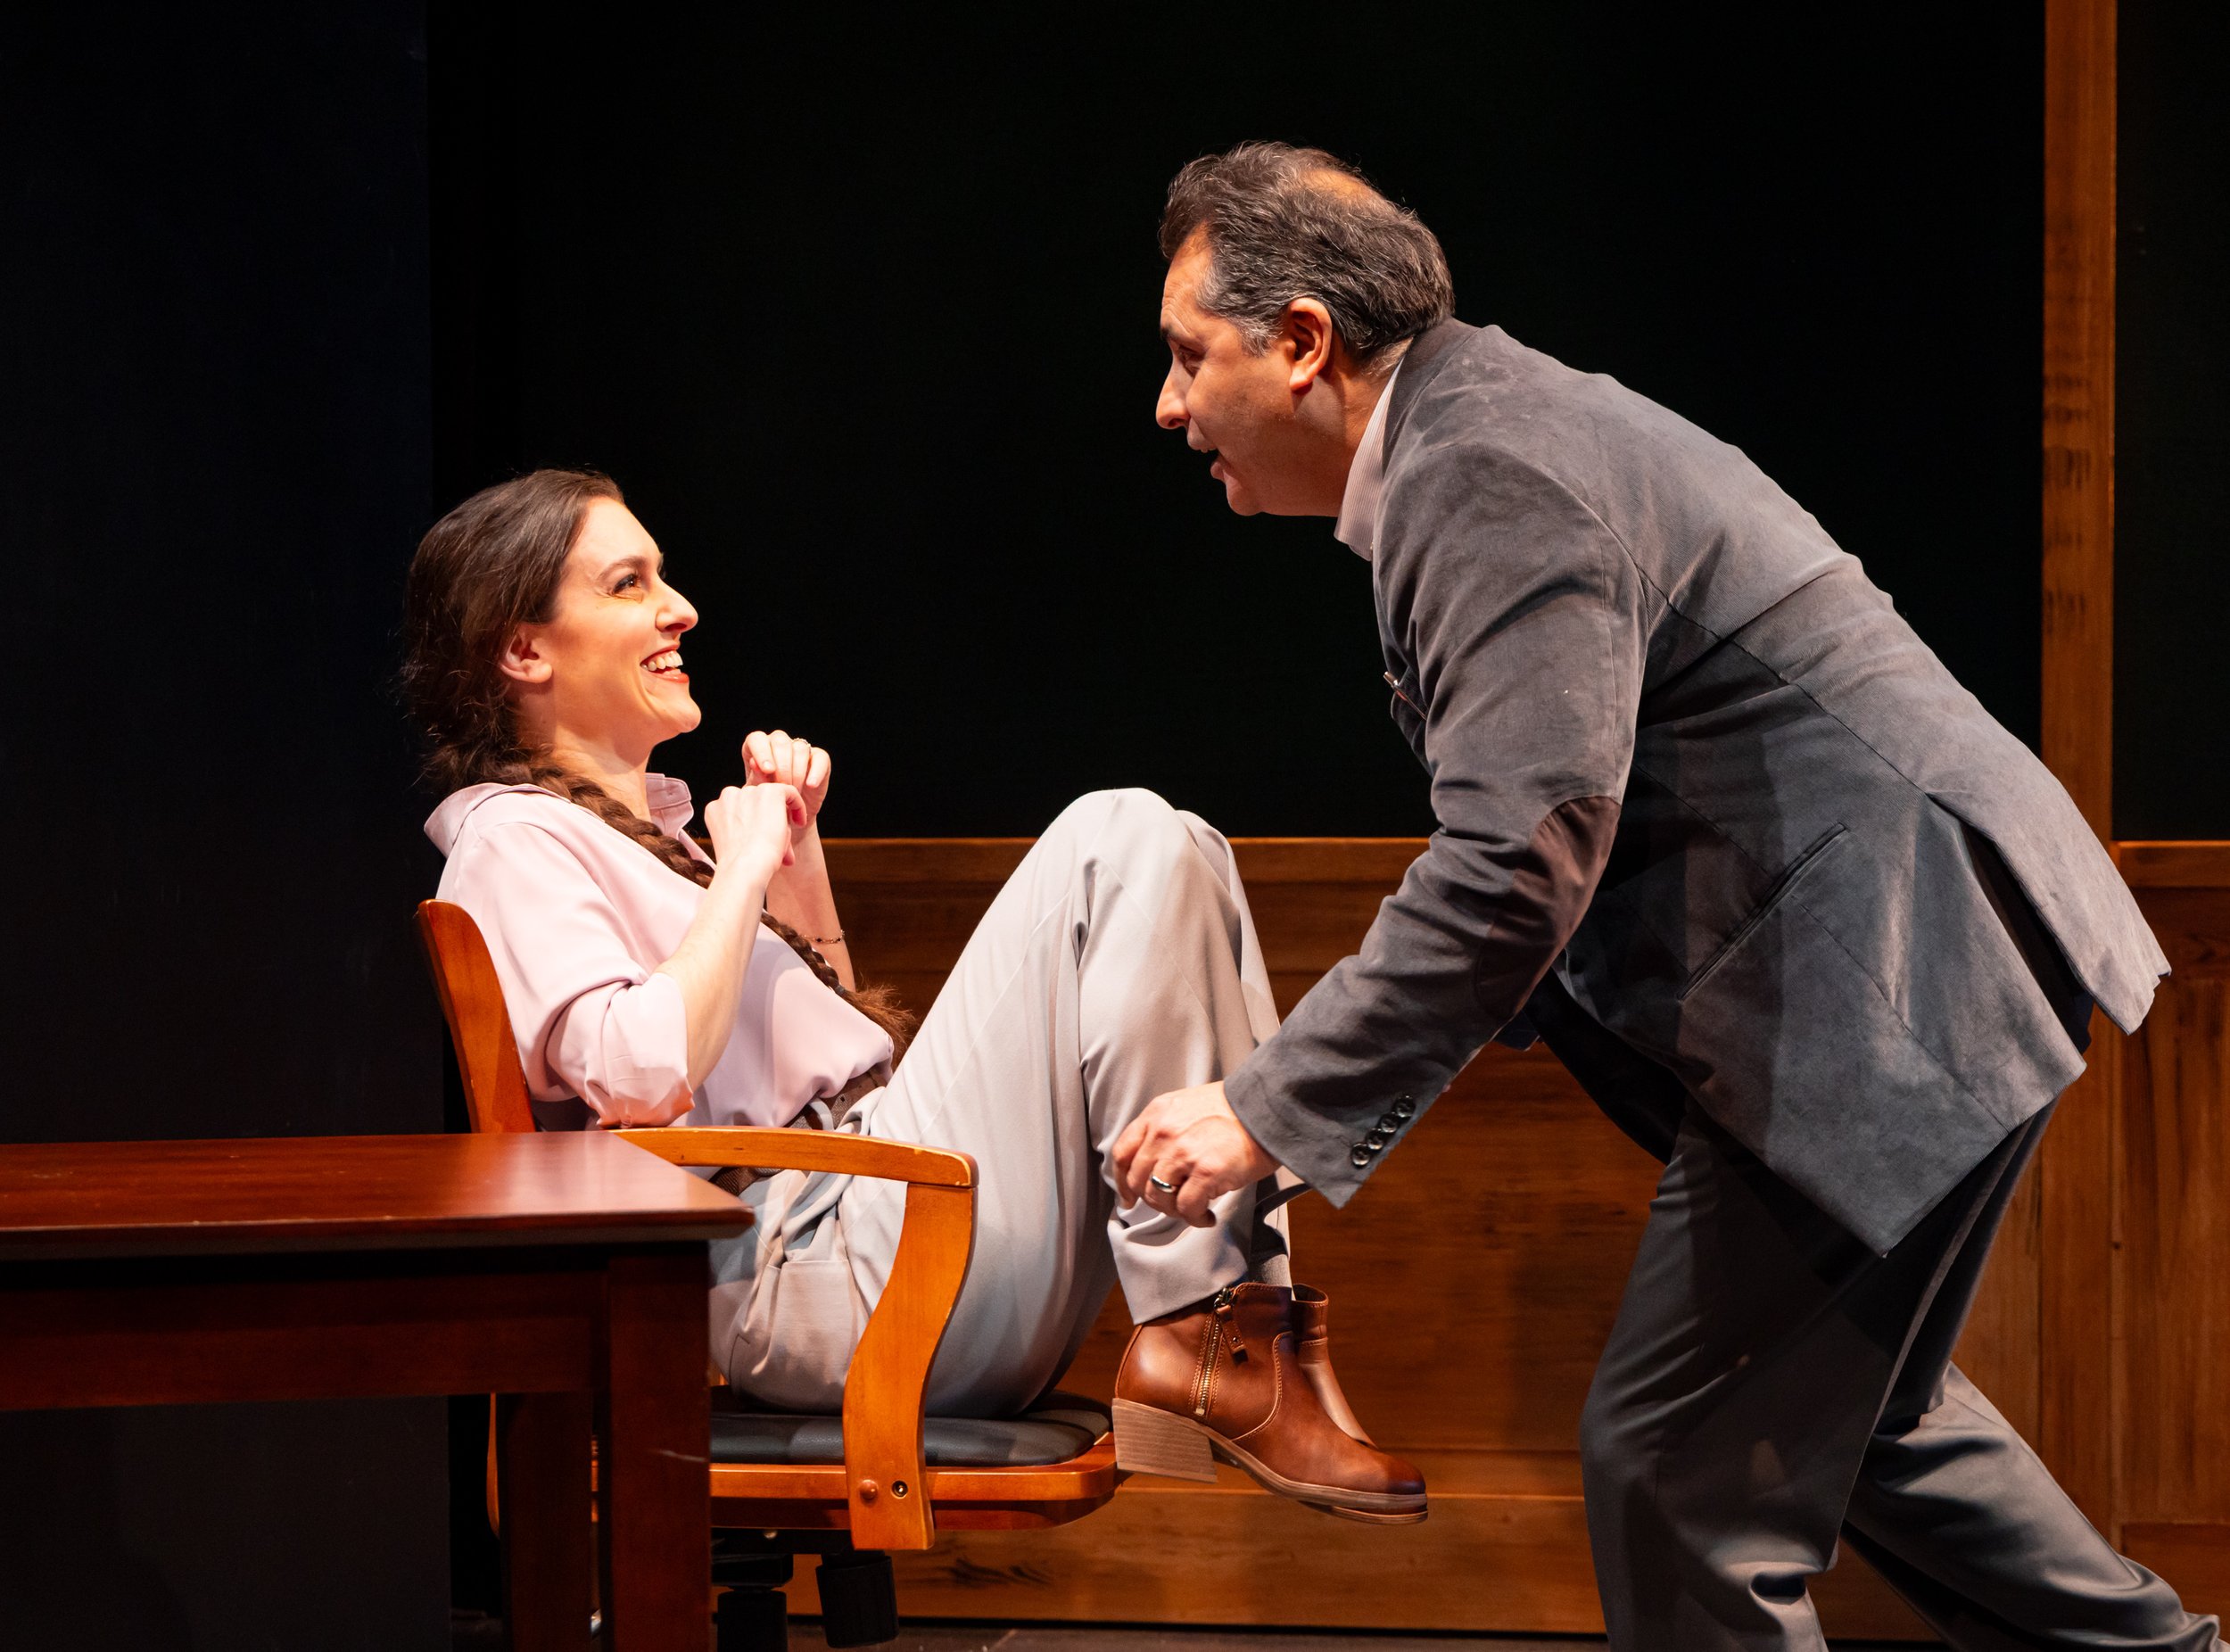 Firdous Bamji plays the lead role of Lukesh in 'This Much I Know' (Theatre J, Washington DC).